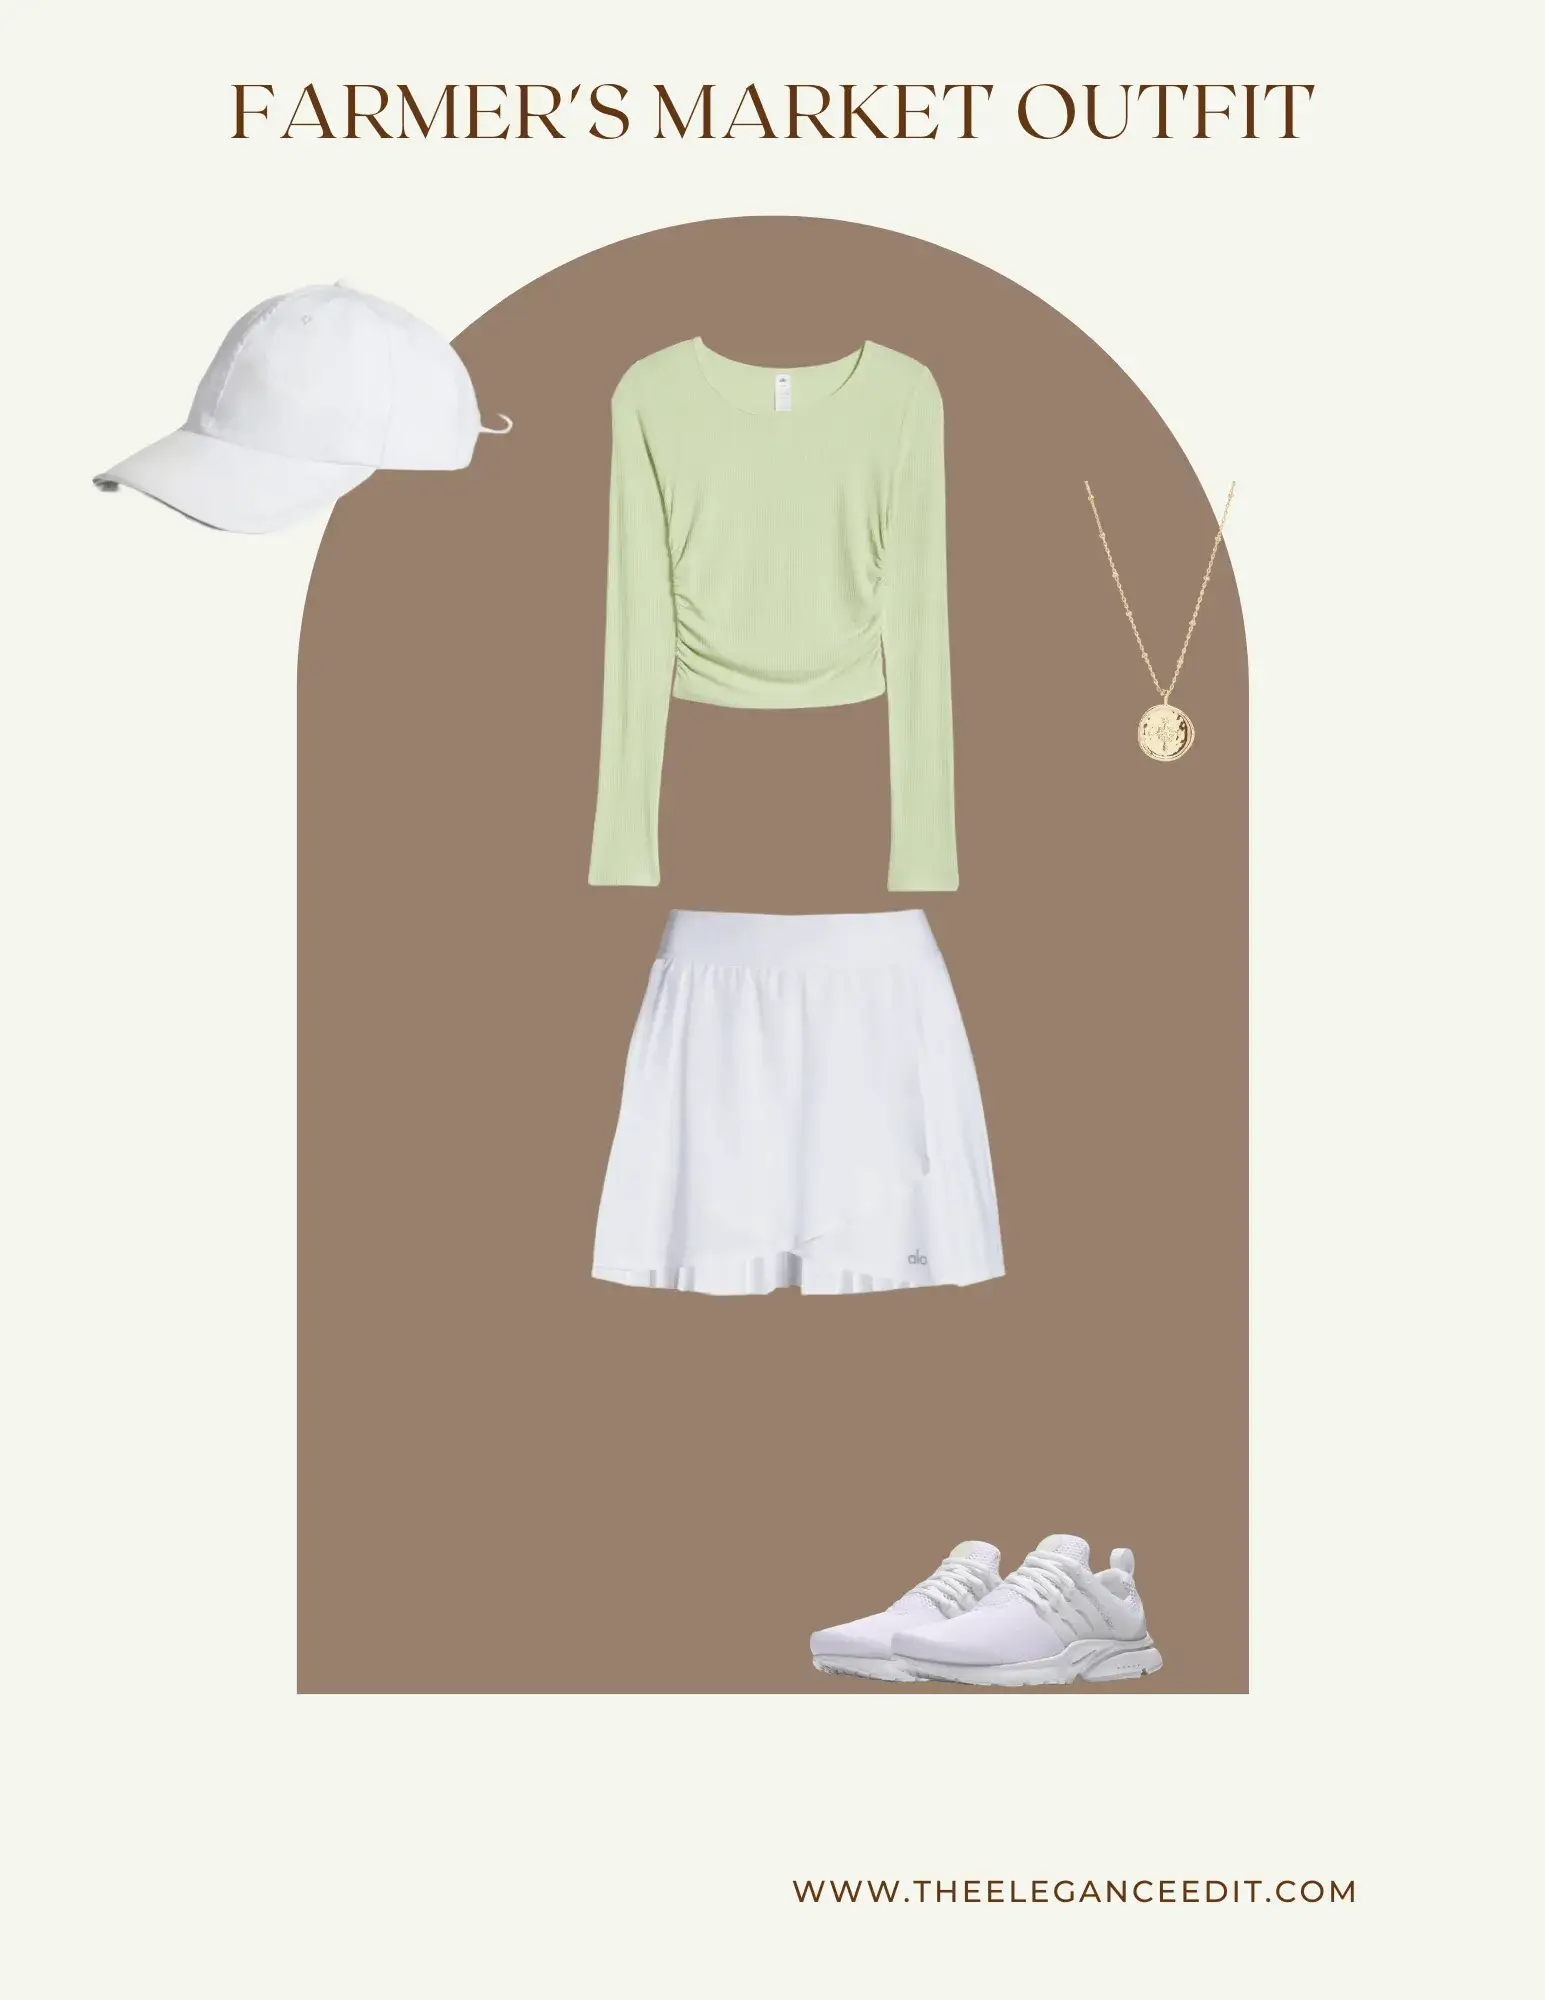 farmer's market outfit with tennis skirt